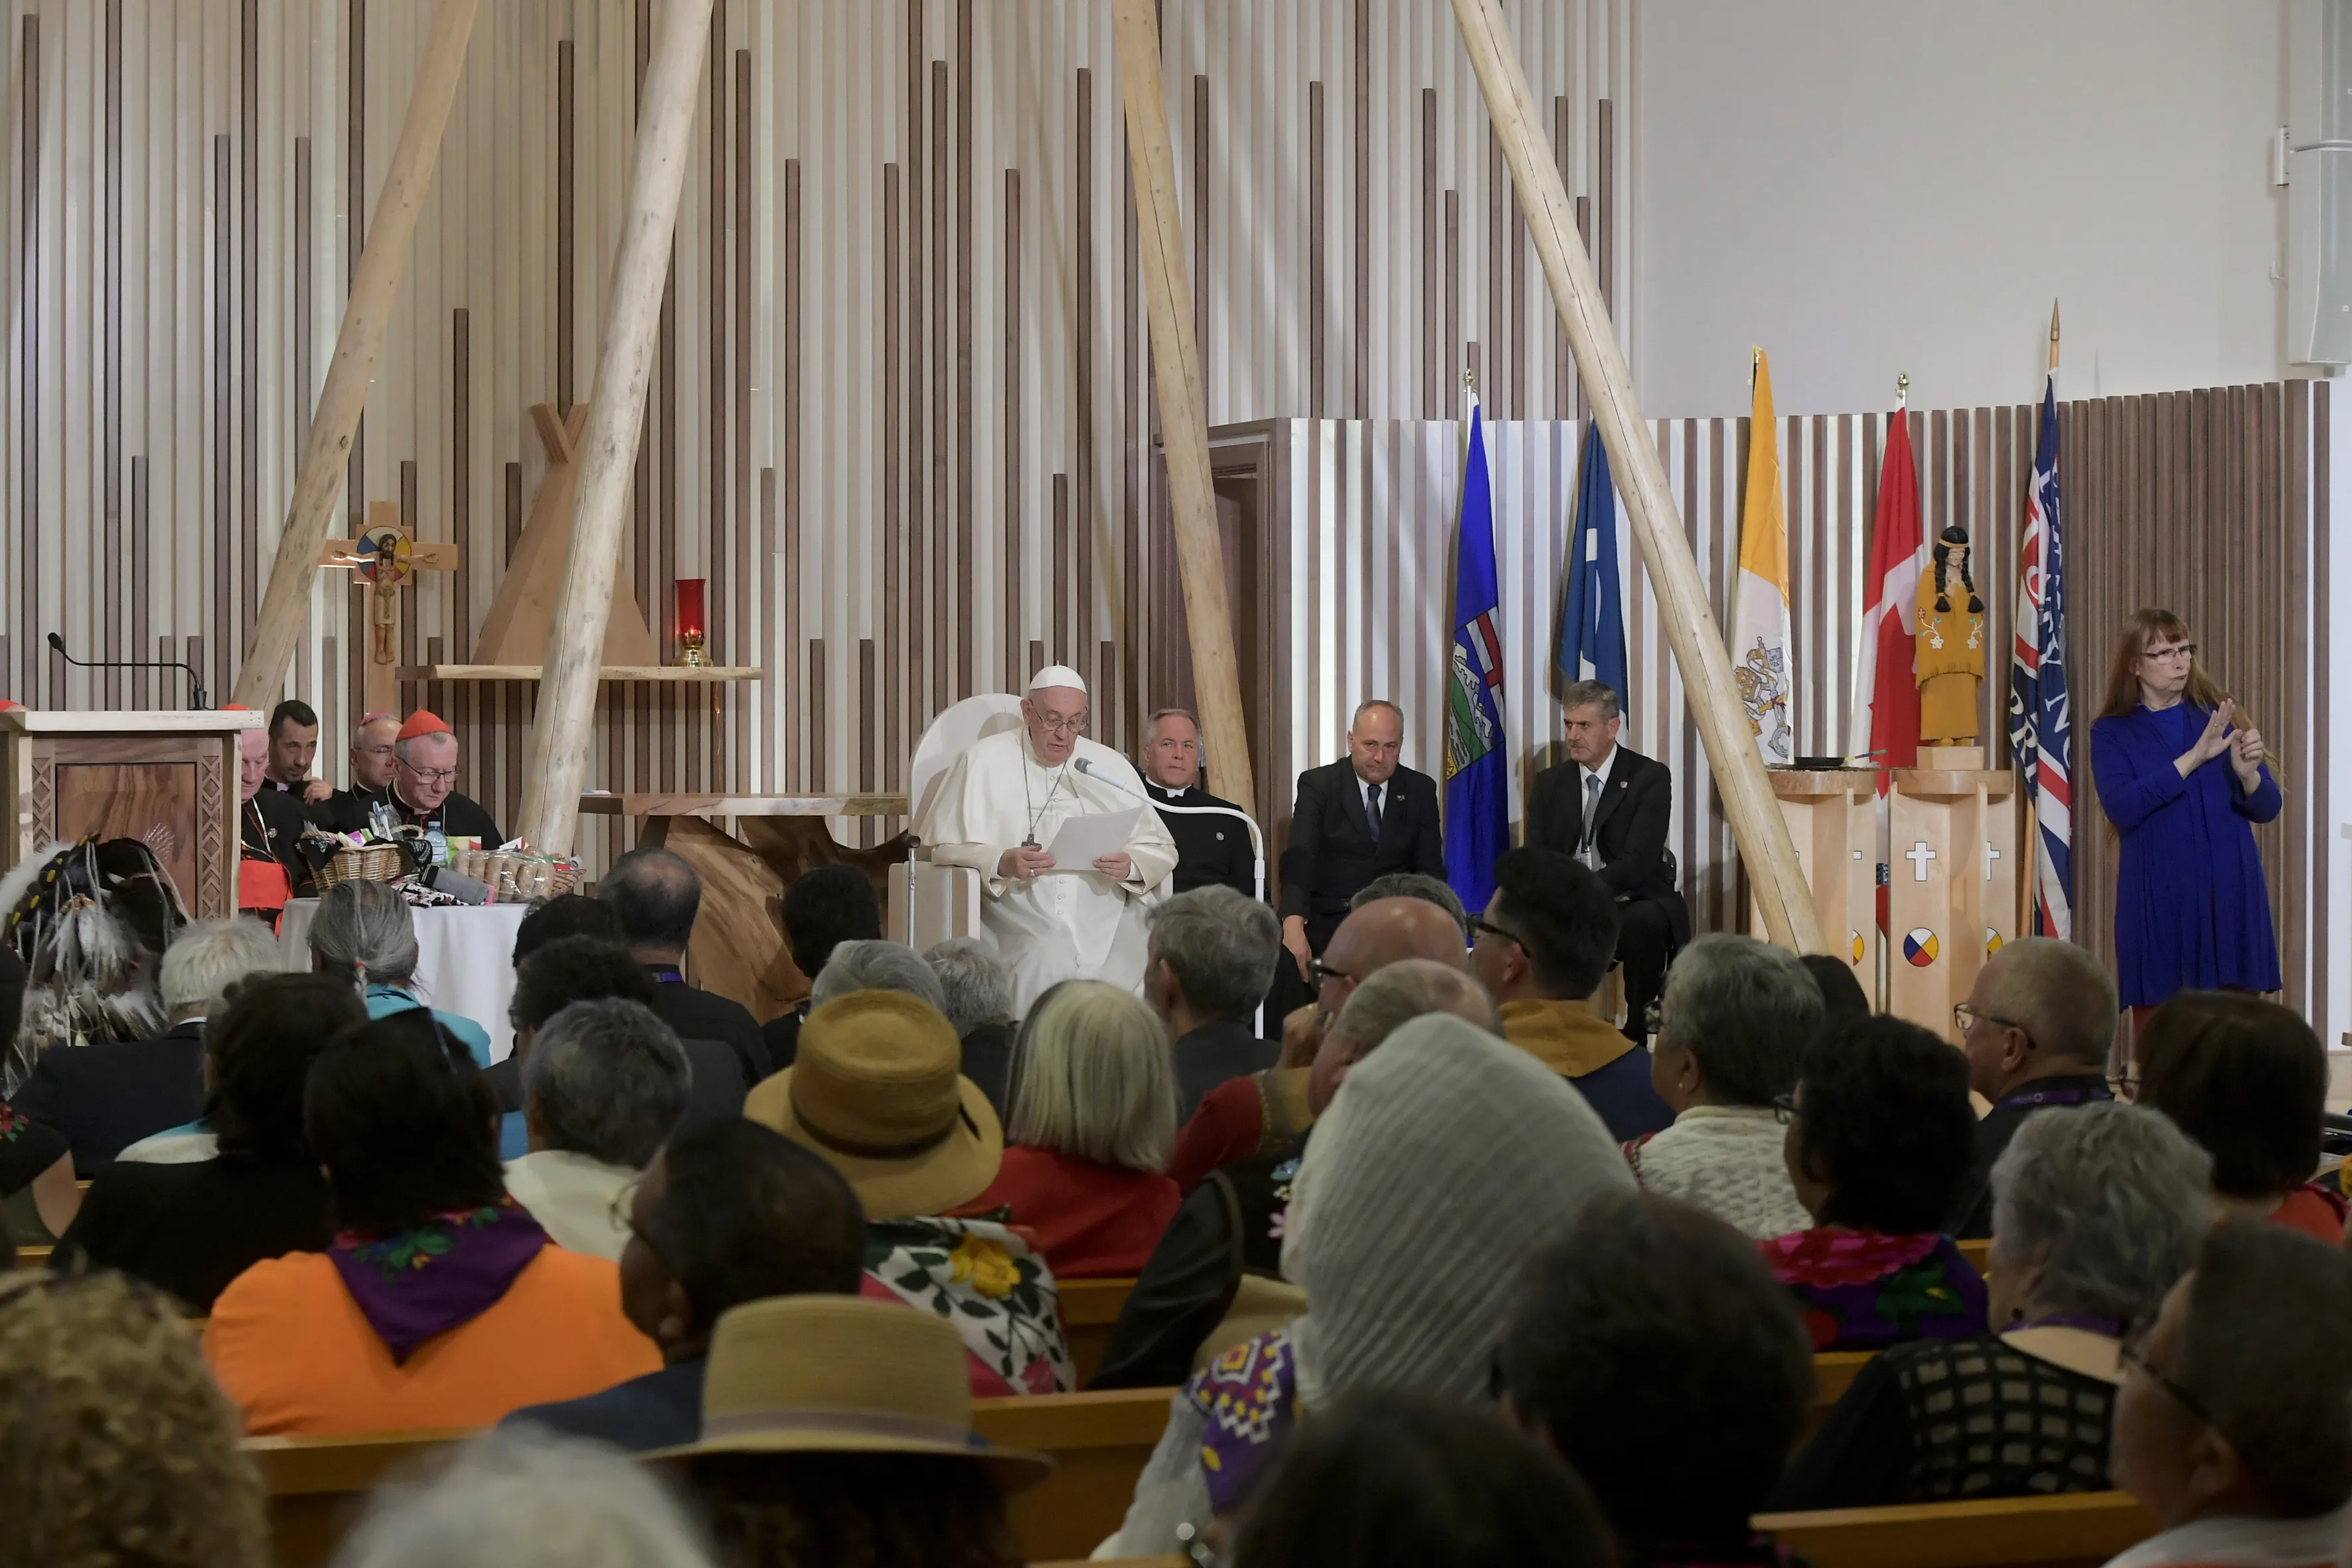 Pope Francis speaks at a meeting with indigenous peoples and members of Sacred Heart parish in Edmonton, Canada, July 25, 2022.?w=200&h=150